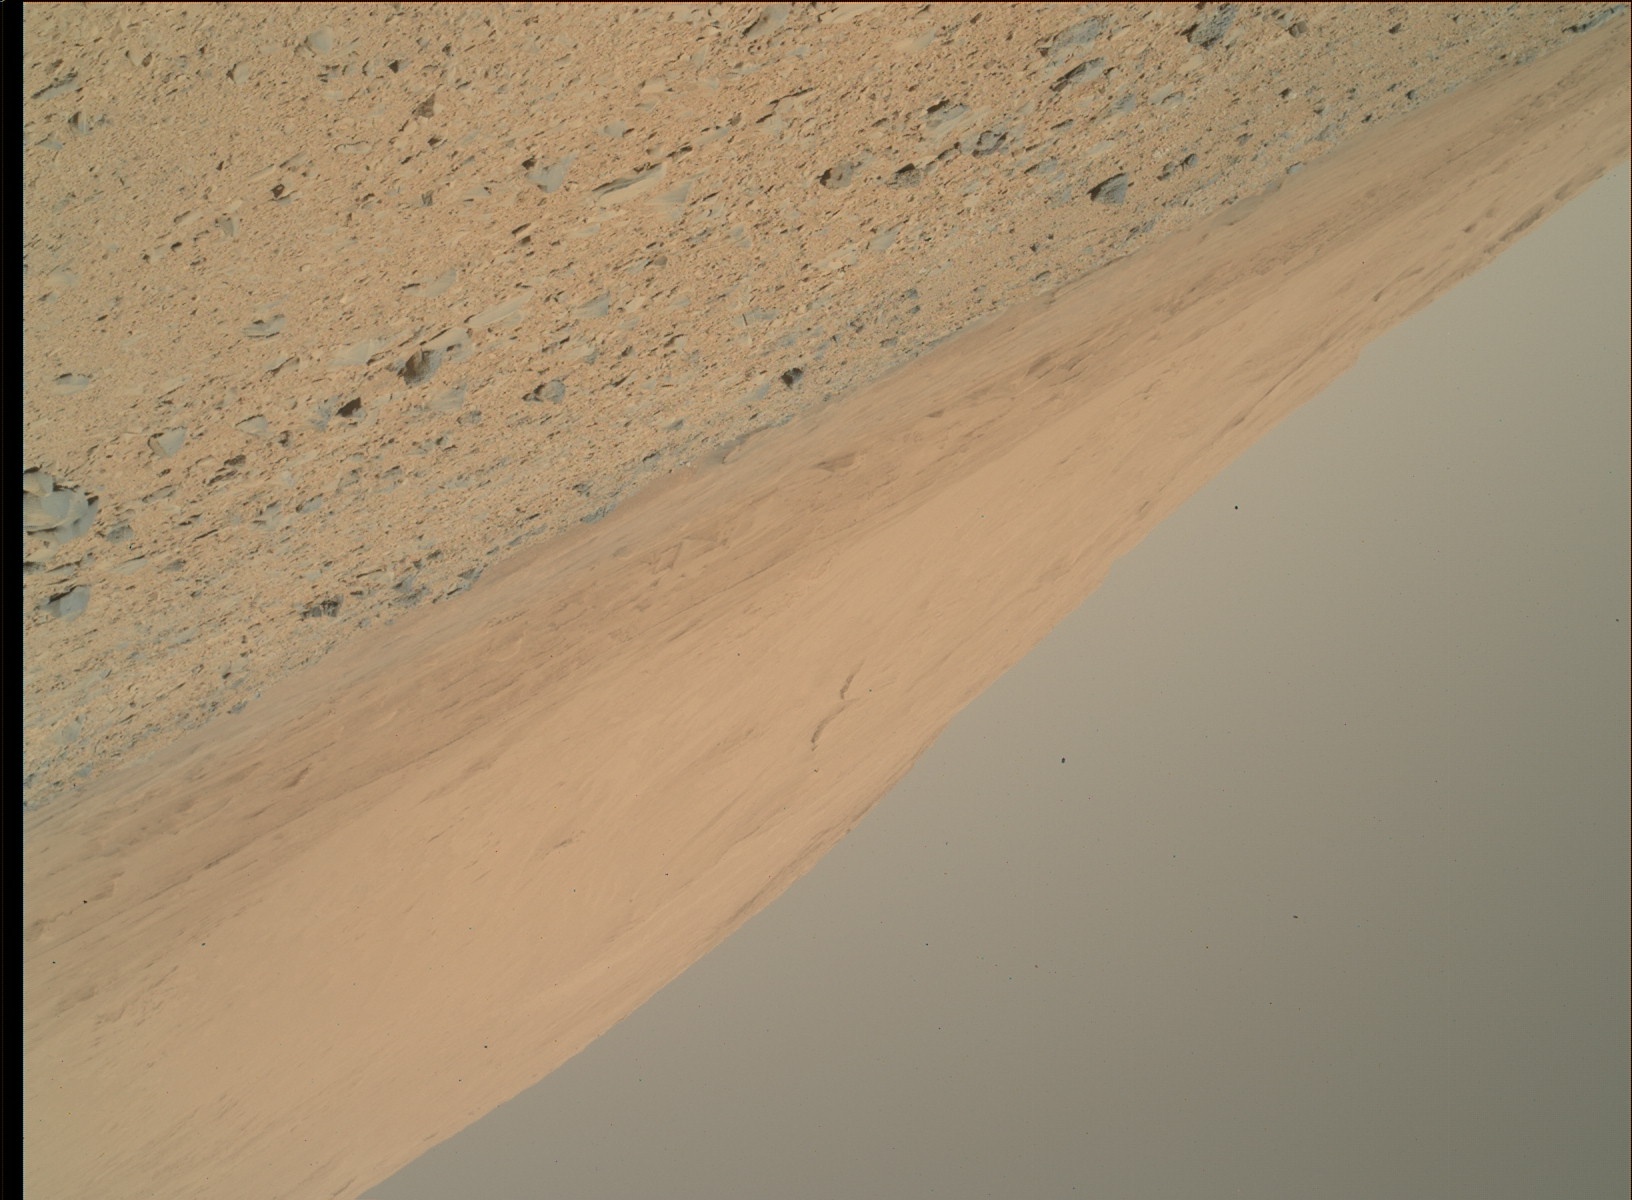 Nasa's Mars rover Curiosity acquired this image using its Mars Hand Lens Imager (MAHLI) on Sol 518